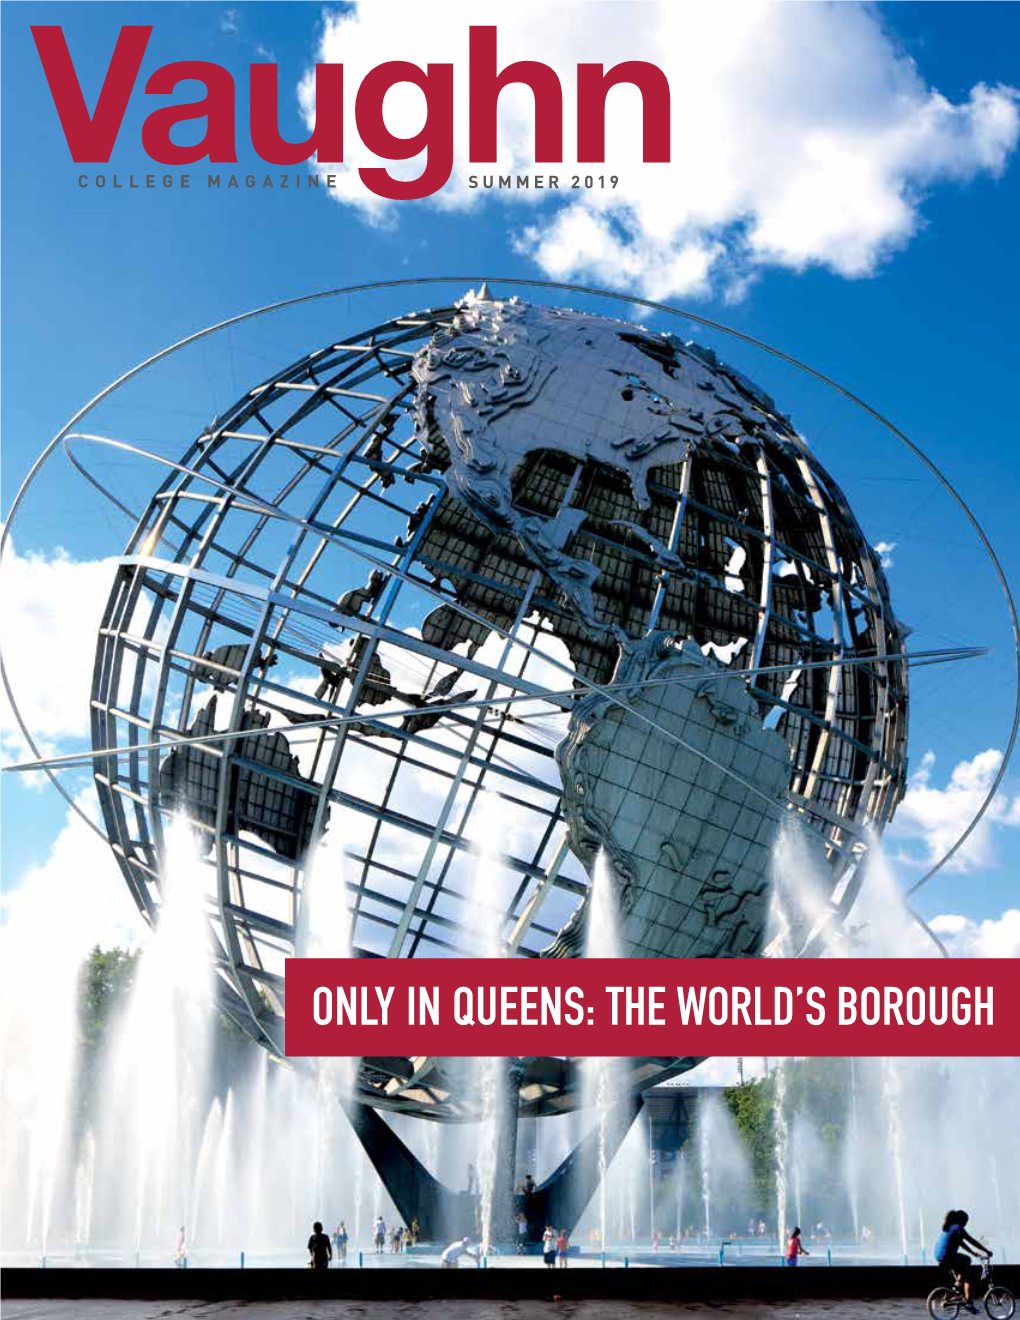 Only in Queens: the World's Borough